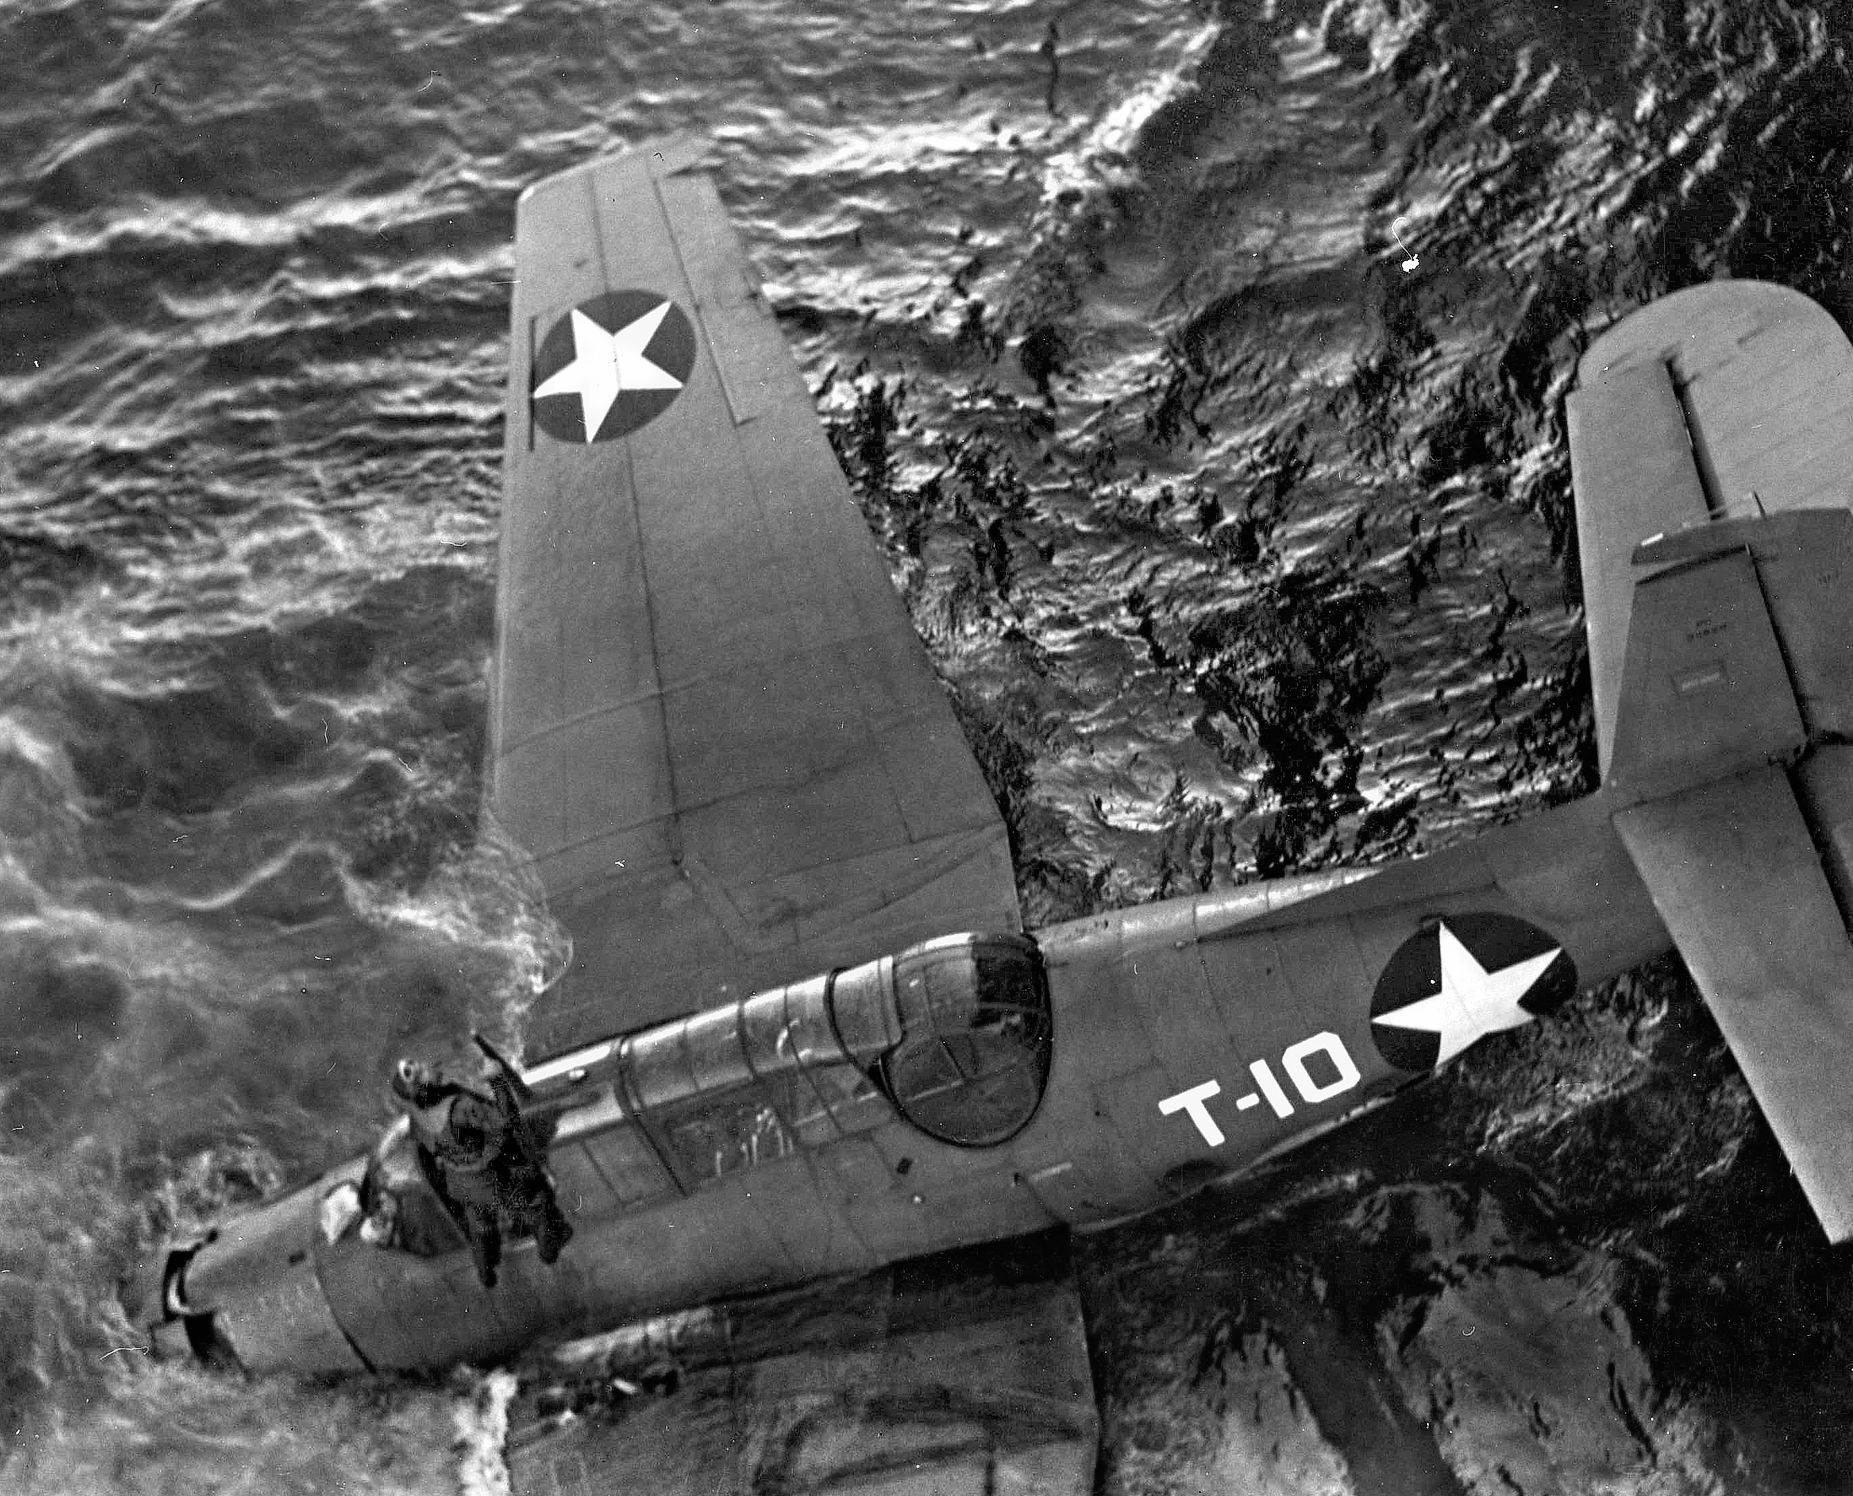 A student aviator emerges from the cockpit of his floating TBF Avenger torpedo bomber. The plane would soon succumb to the ocean. While Avengers held a crew of three, on training missions the aviators flew alone.